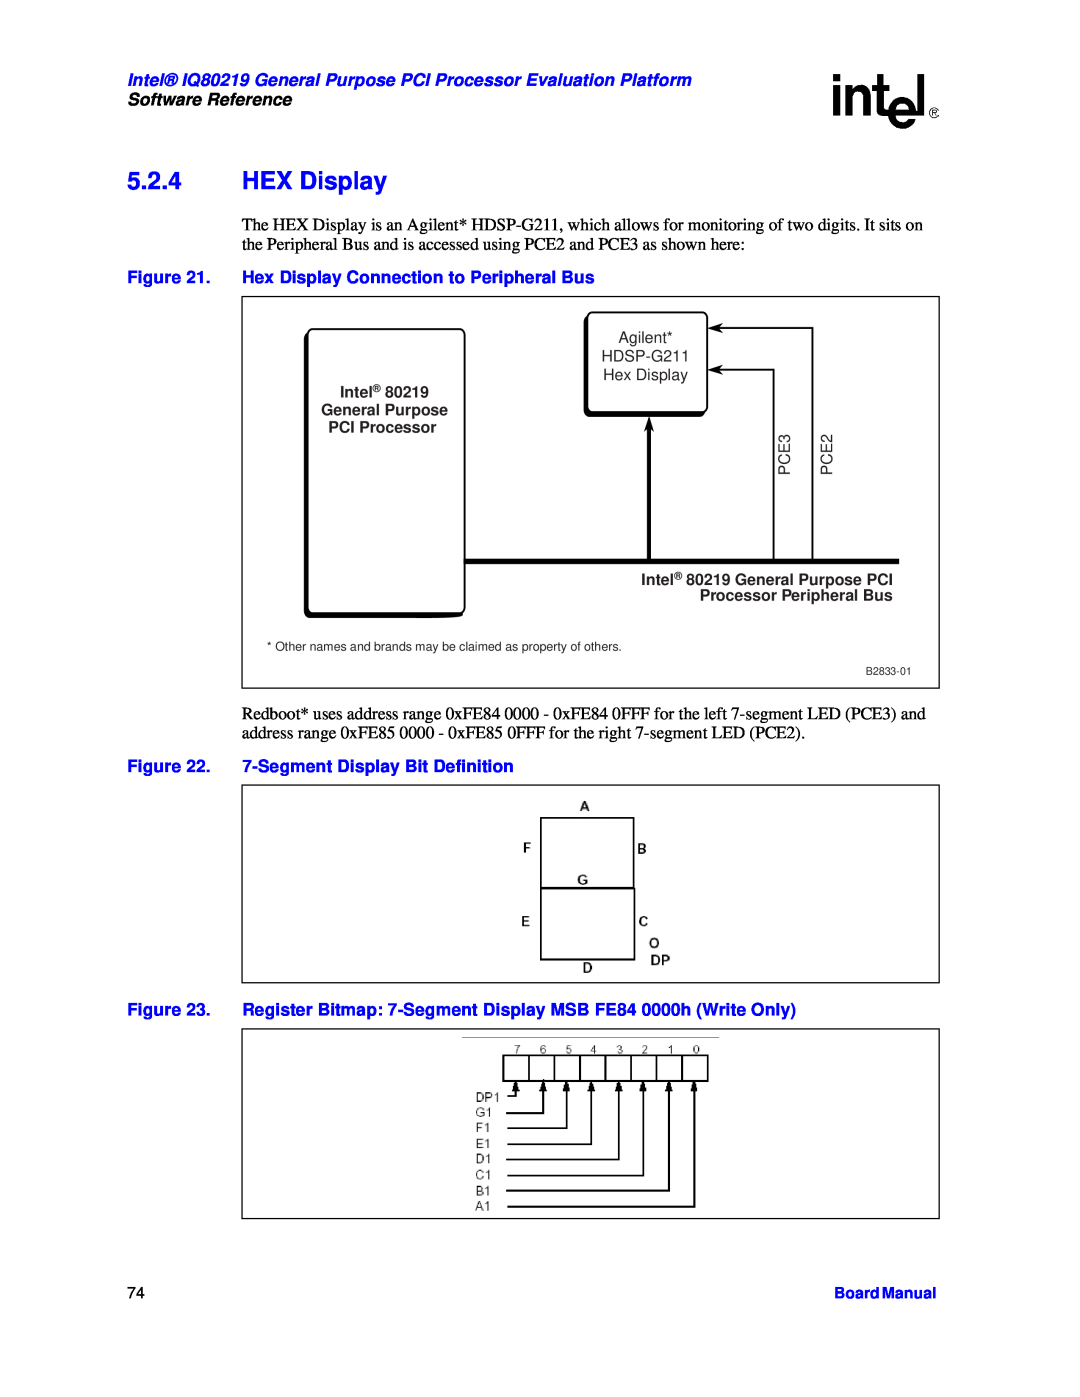 Intel IQ80219 HEX Display, Hex Display Connection to Peripheral Bus, 7-Segment Display Bit Definition, Software Reference 